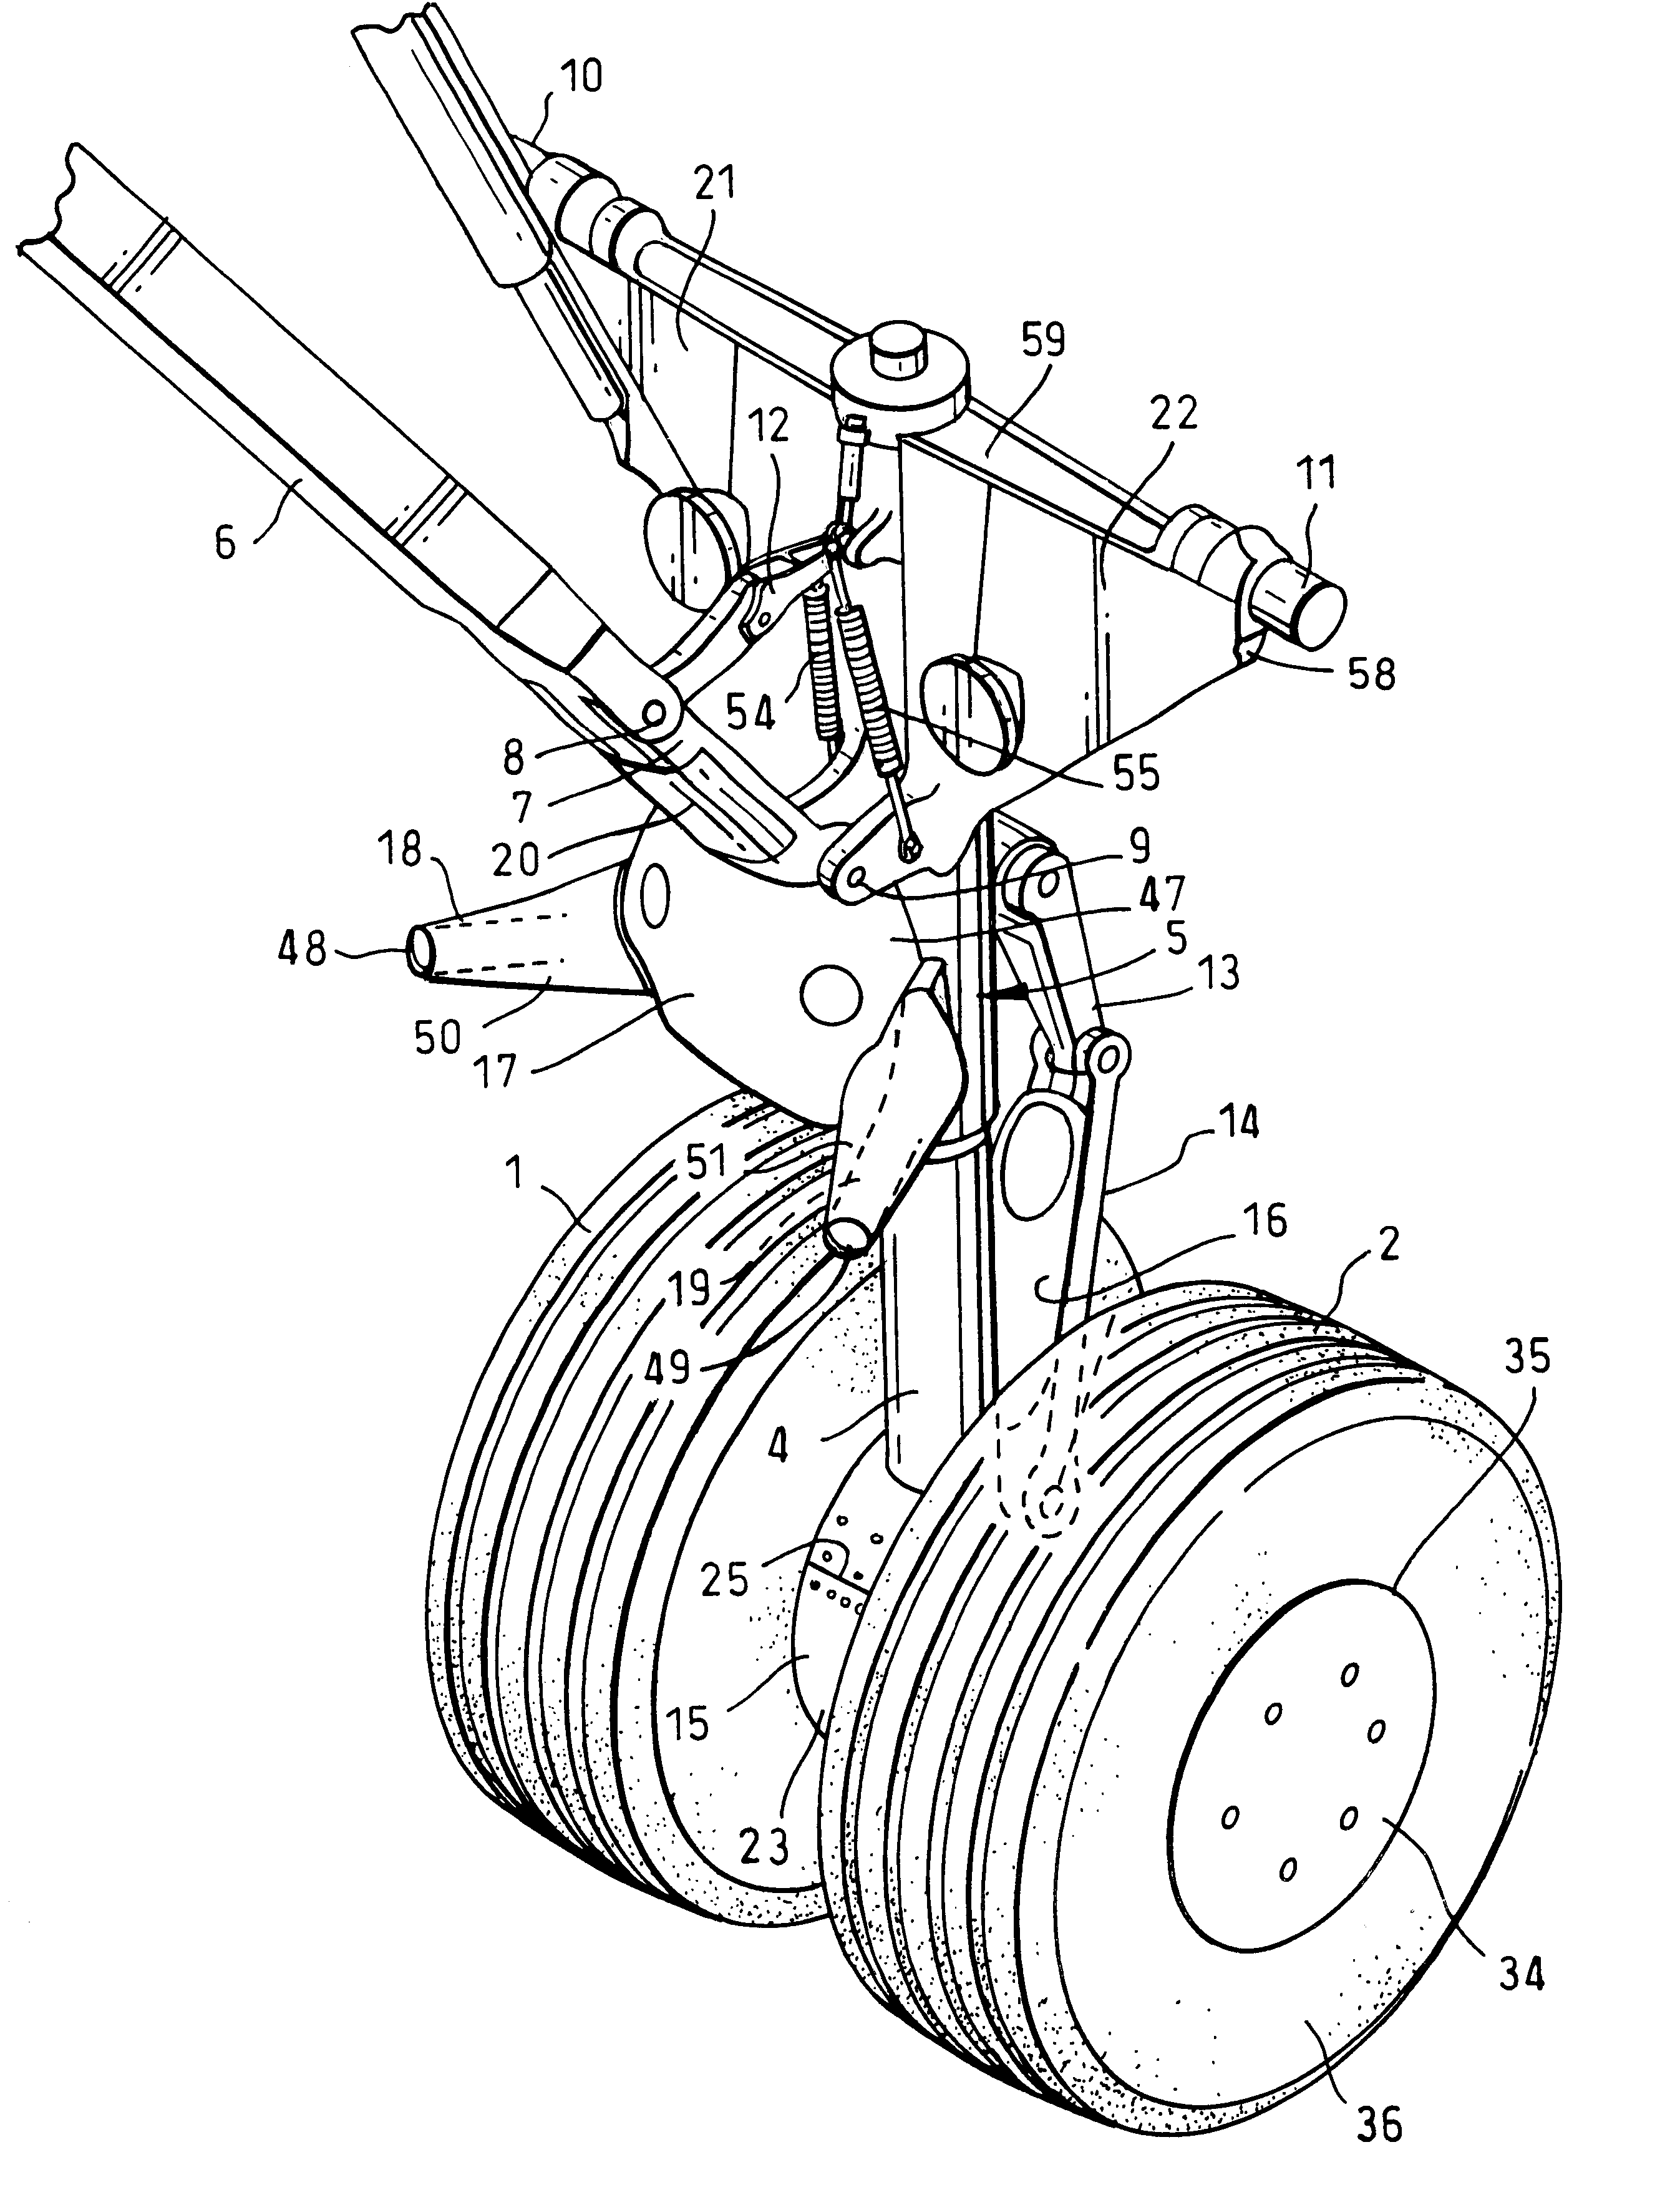 Aircraft noise reduction apparatus